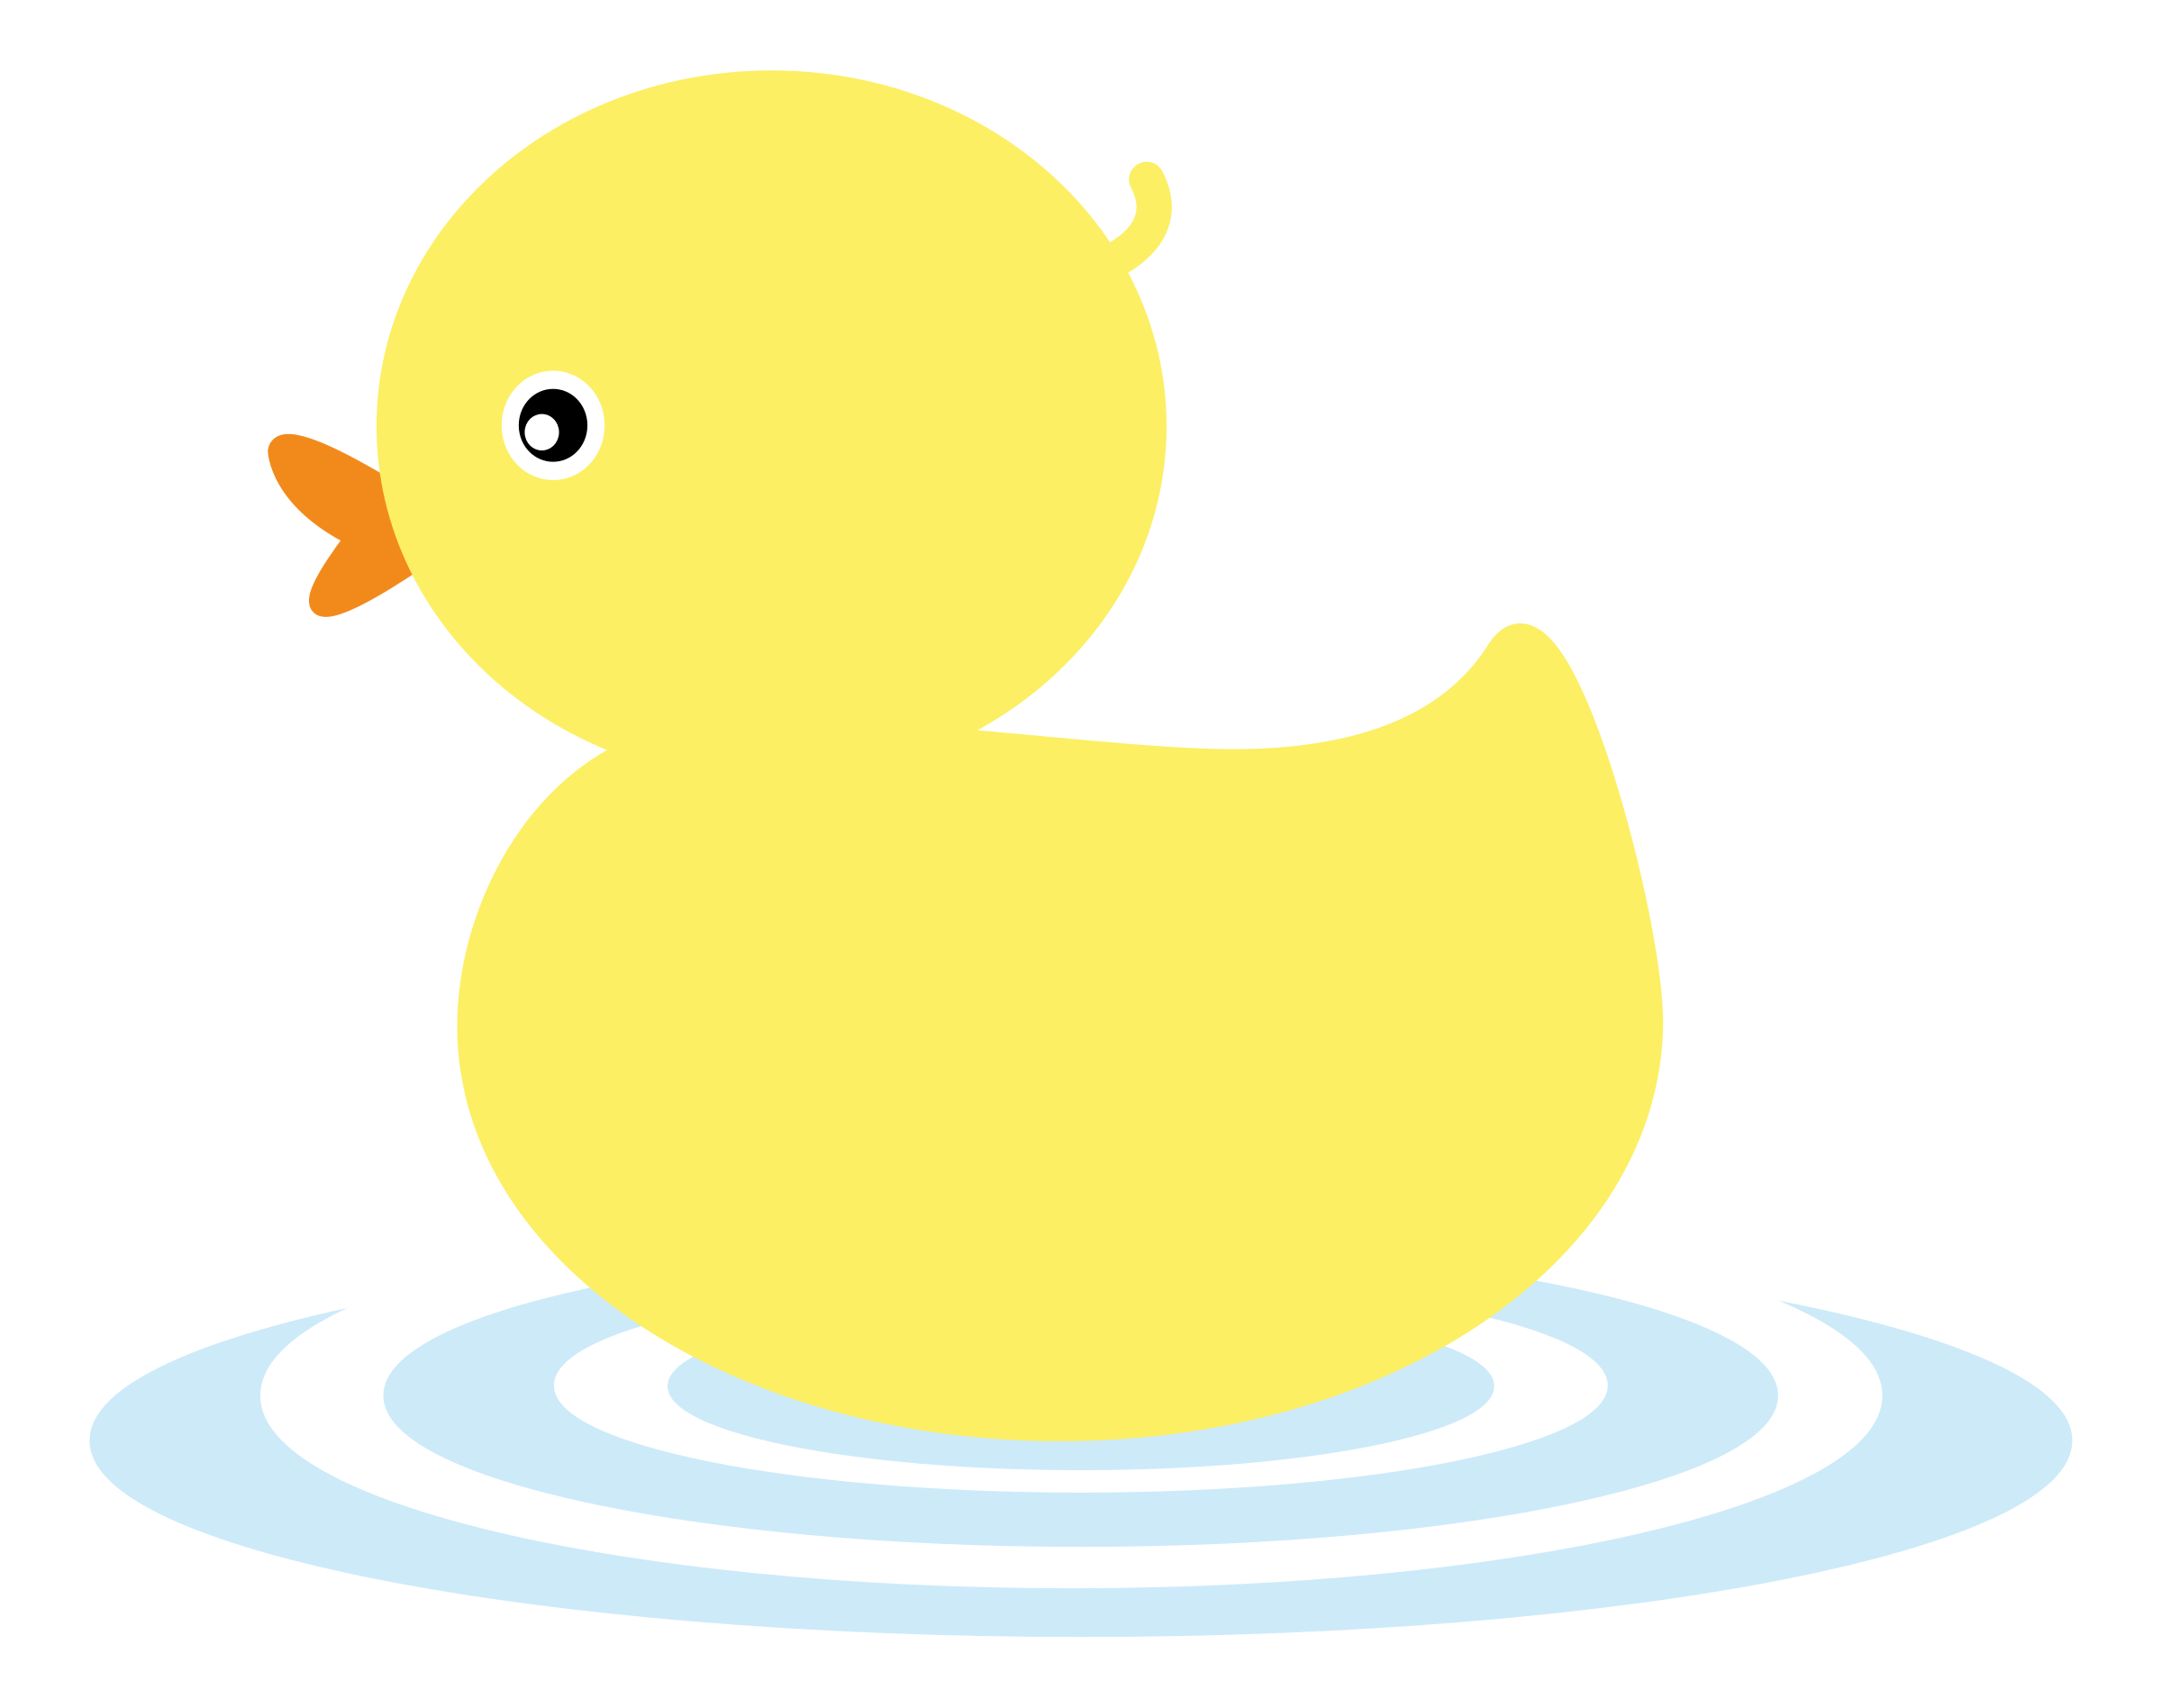 Duck by agomjo on. Duckling clipart duckie